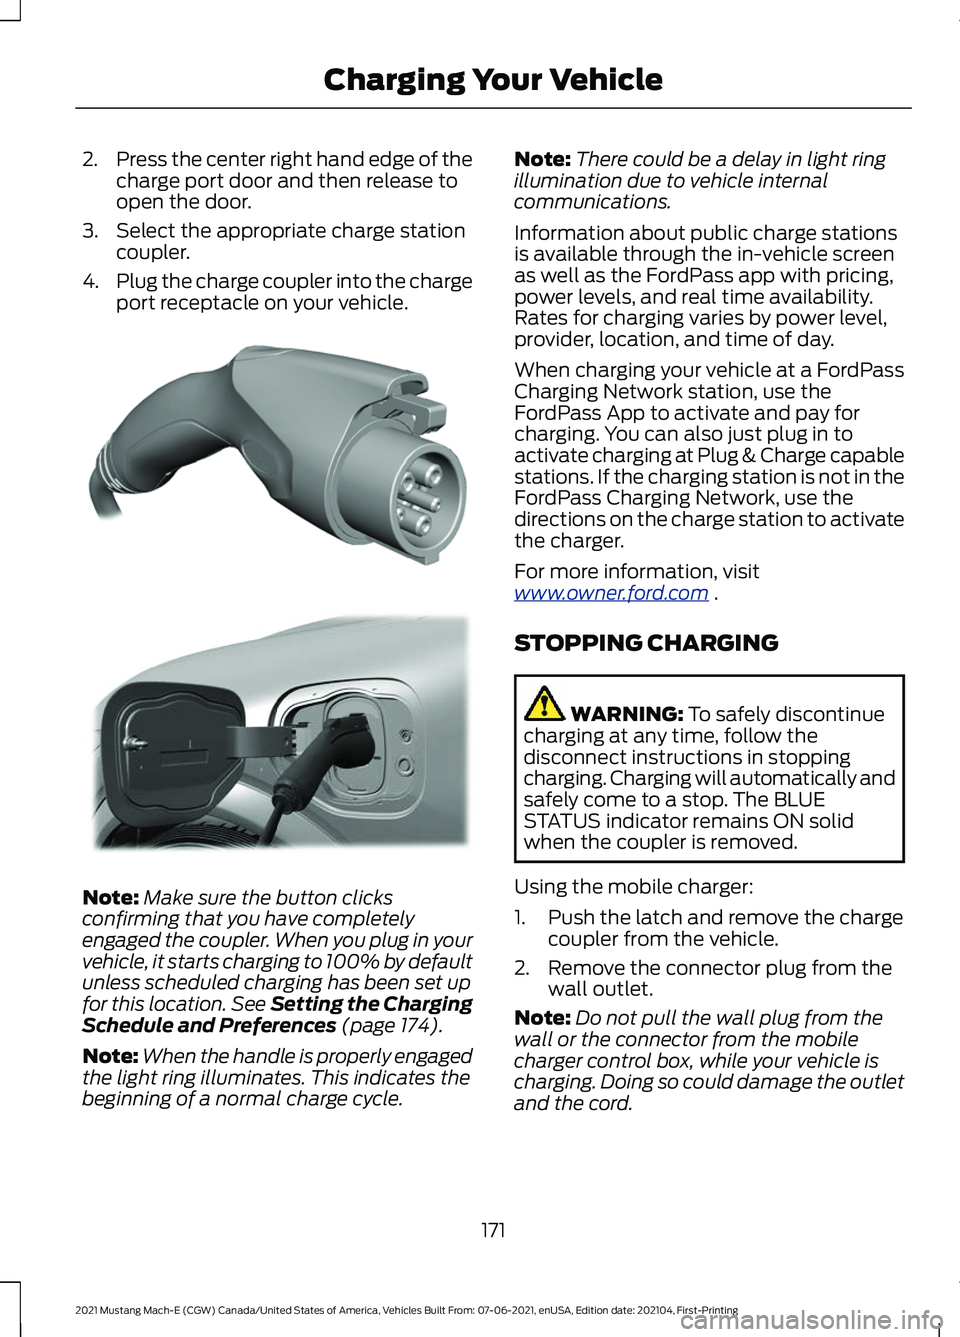 FORD MUSTANG MACH-E 2021  Owners Manual 2.
Press the center right hand edge of the
charge port door and then release to
open the door.
3. Select the appropriate charge station coupler.
4. Plug the charge coupler into the charge
port recepta